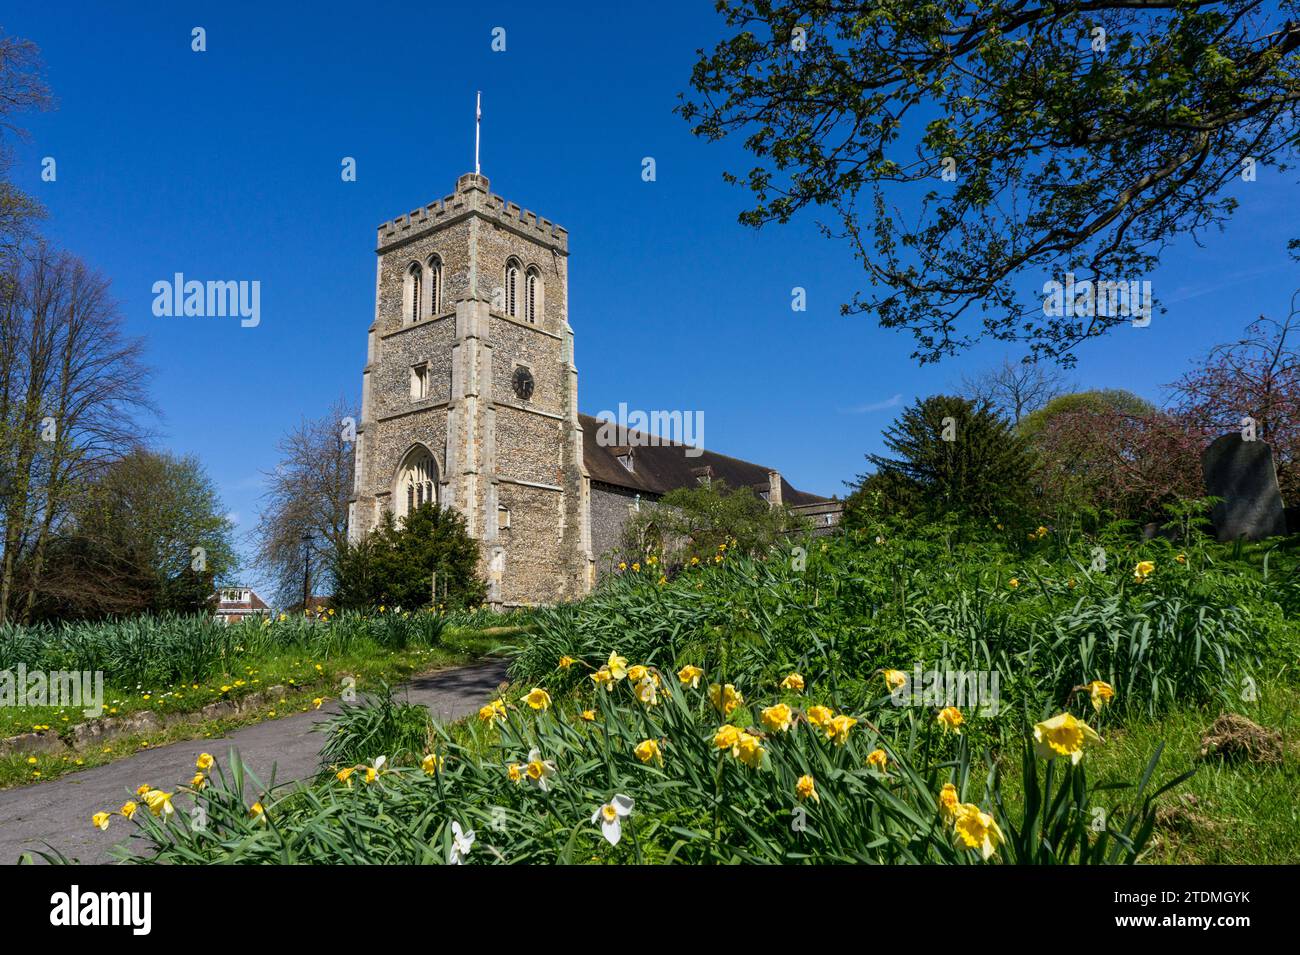 St Ethelreda's church, Old Hatfield, Hertfordshire, UK; earliest parts of the building date from 13th century Stock Photo